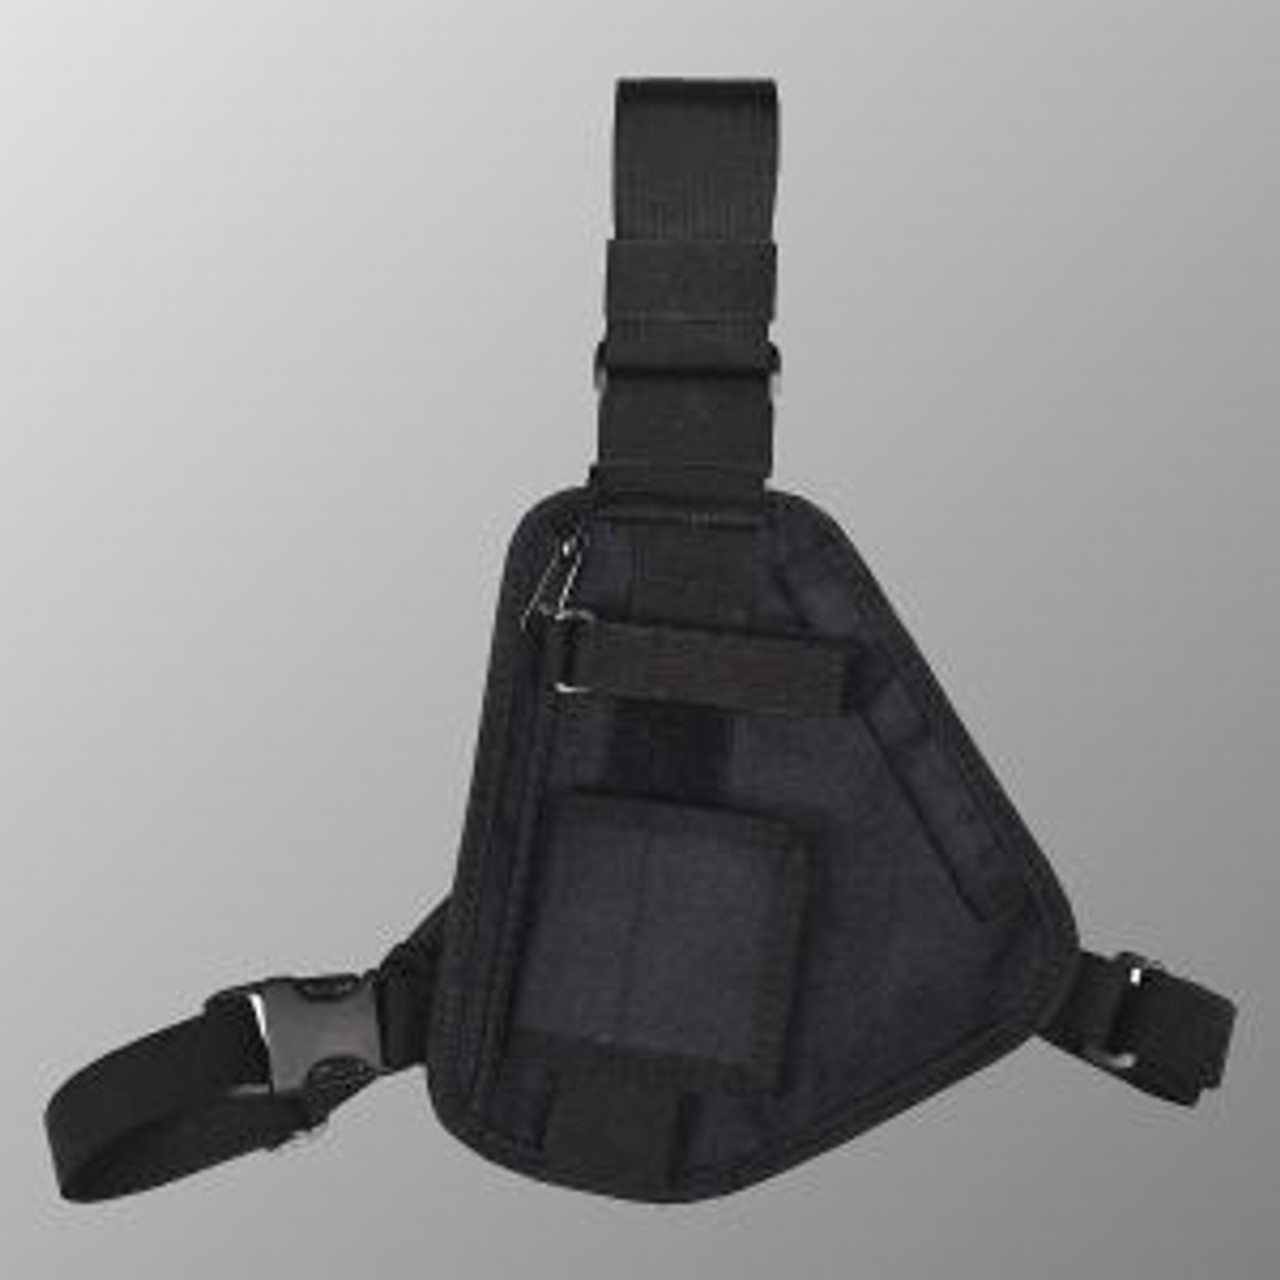 Kenwood TK-3400UP 3-Point Chest Harness - Black